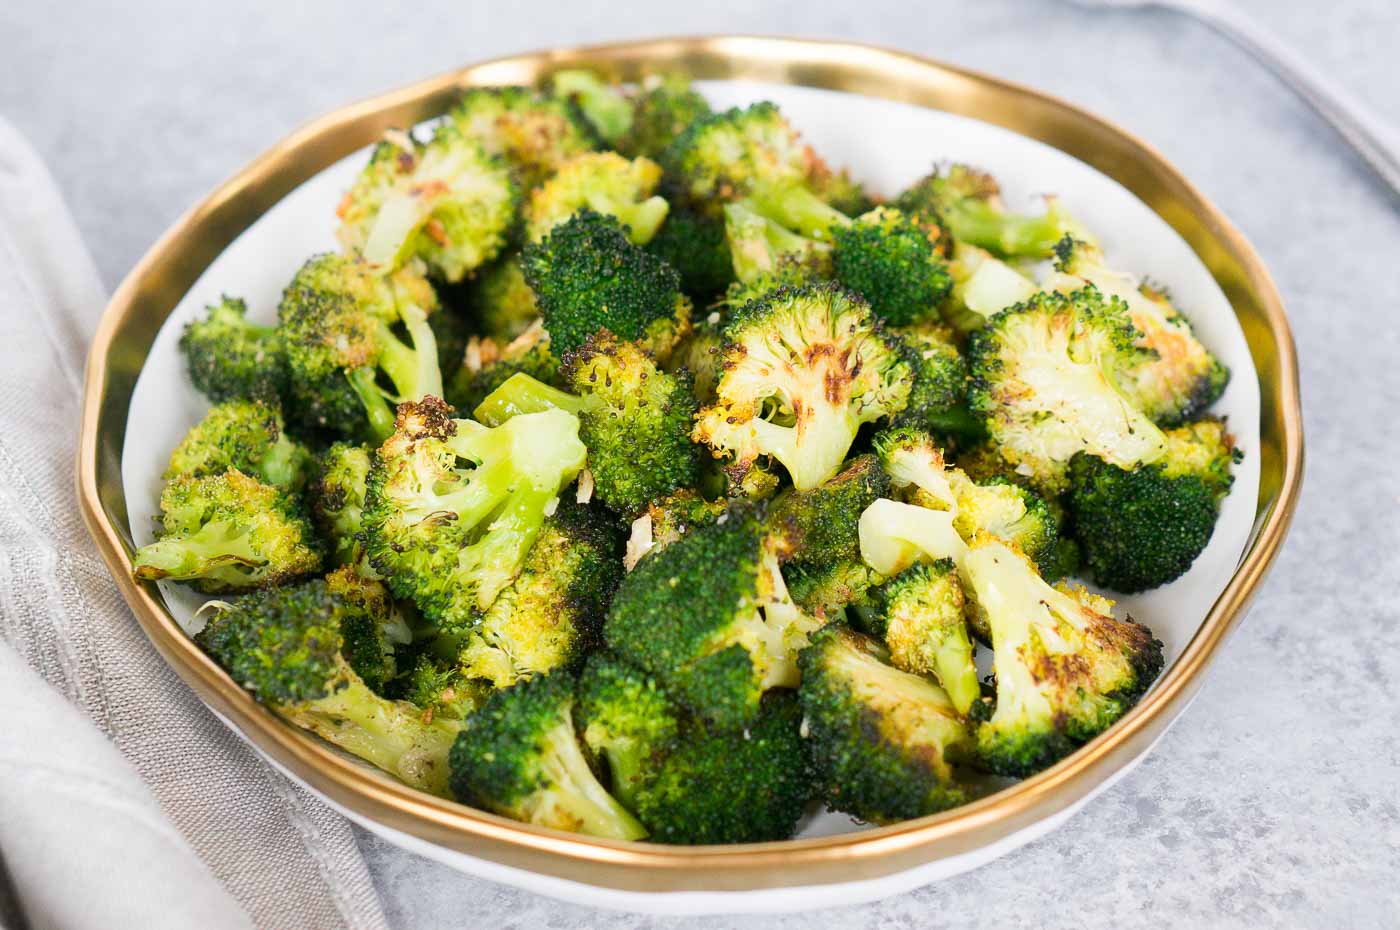 oven roasted garlic broccoli in a bowl